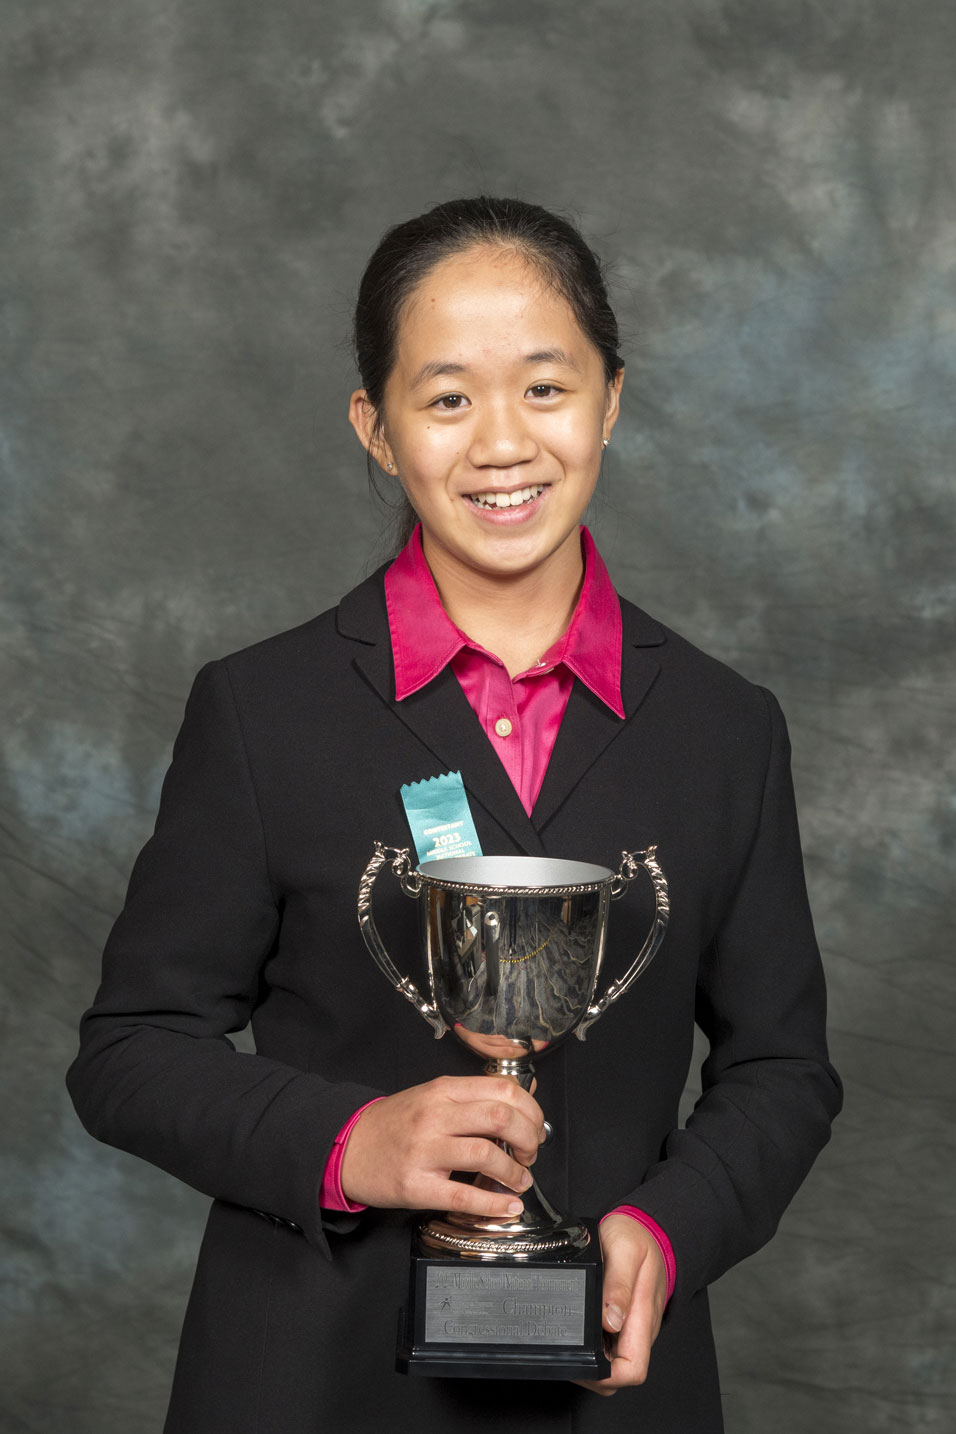 Katie Chan from Arizona College Prep Middle School in Arizona<br />
Coached by Manjula Reddy